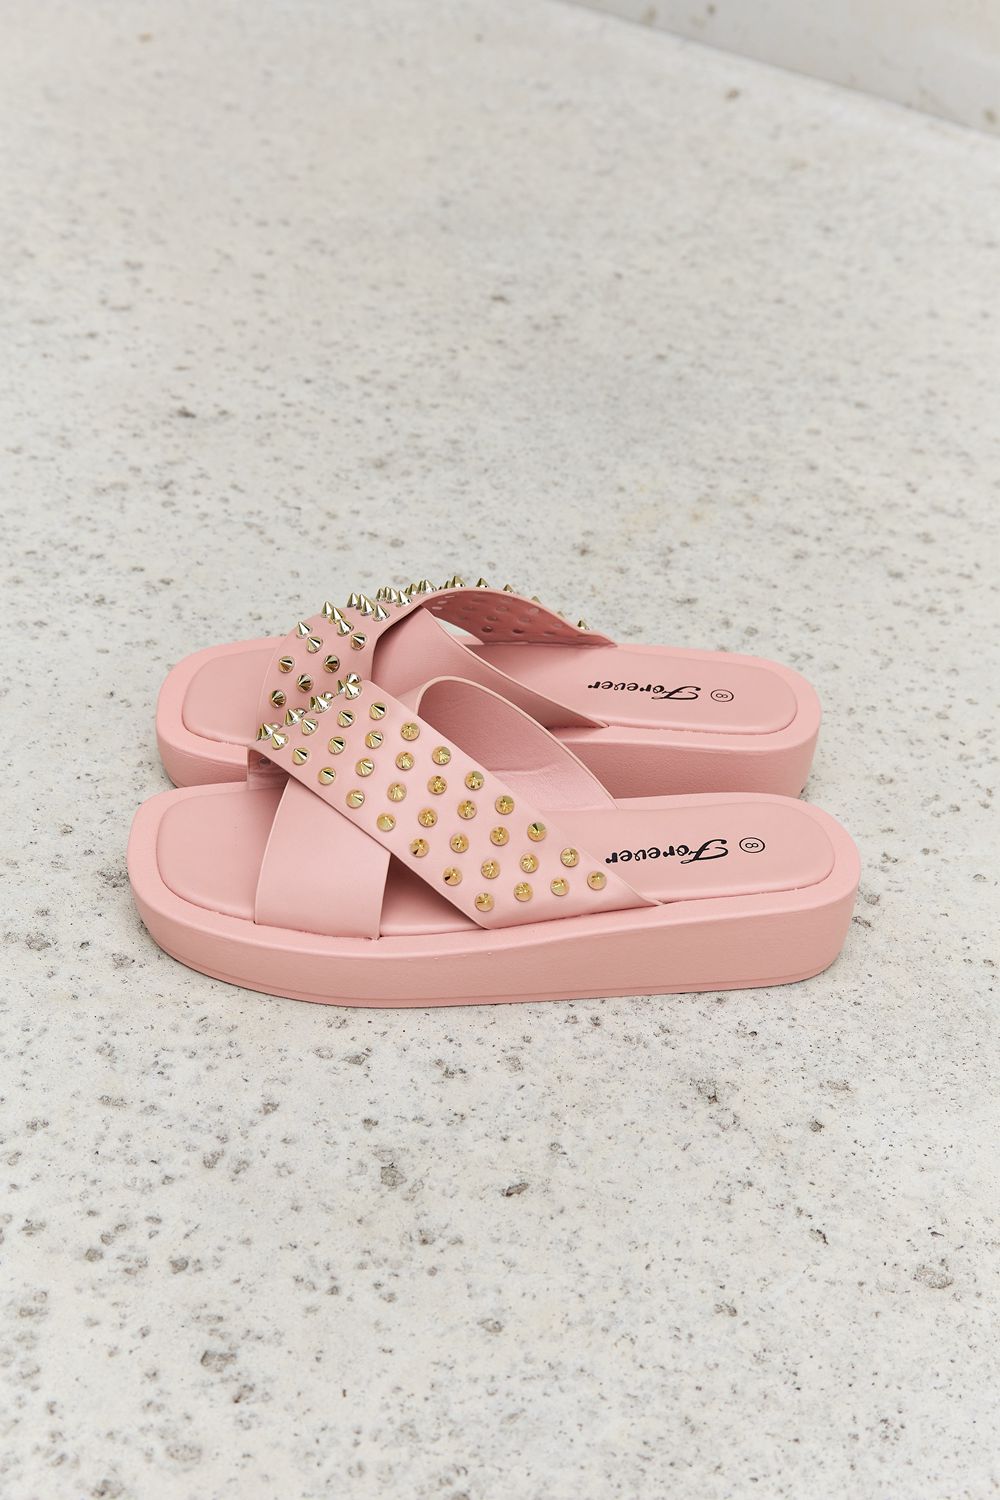 Forever Link Studded Cross Strap Sandals in Blush - Tigbul's Fashion